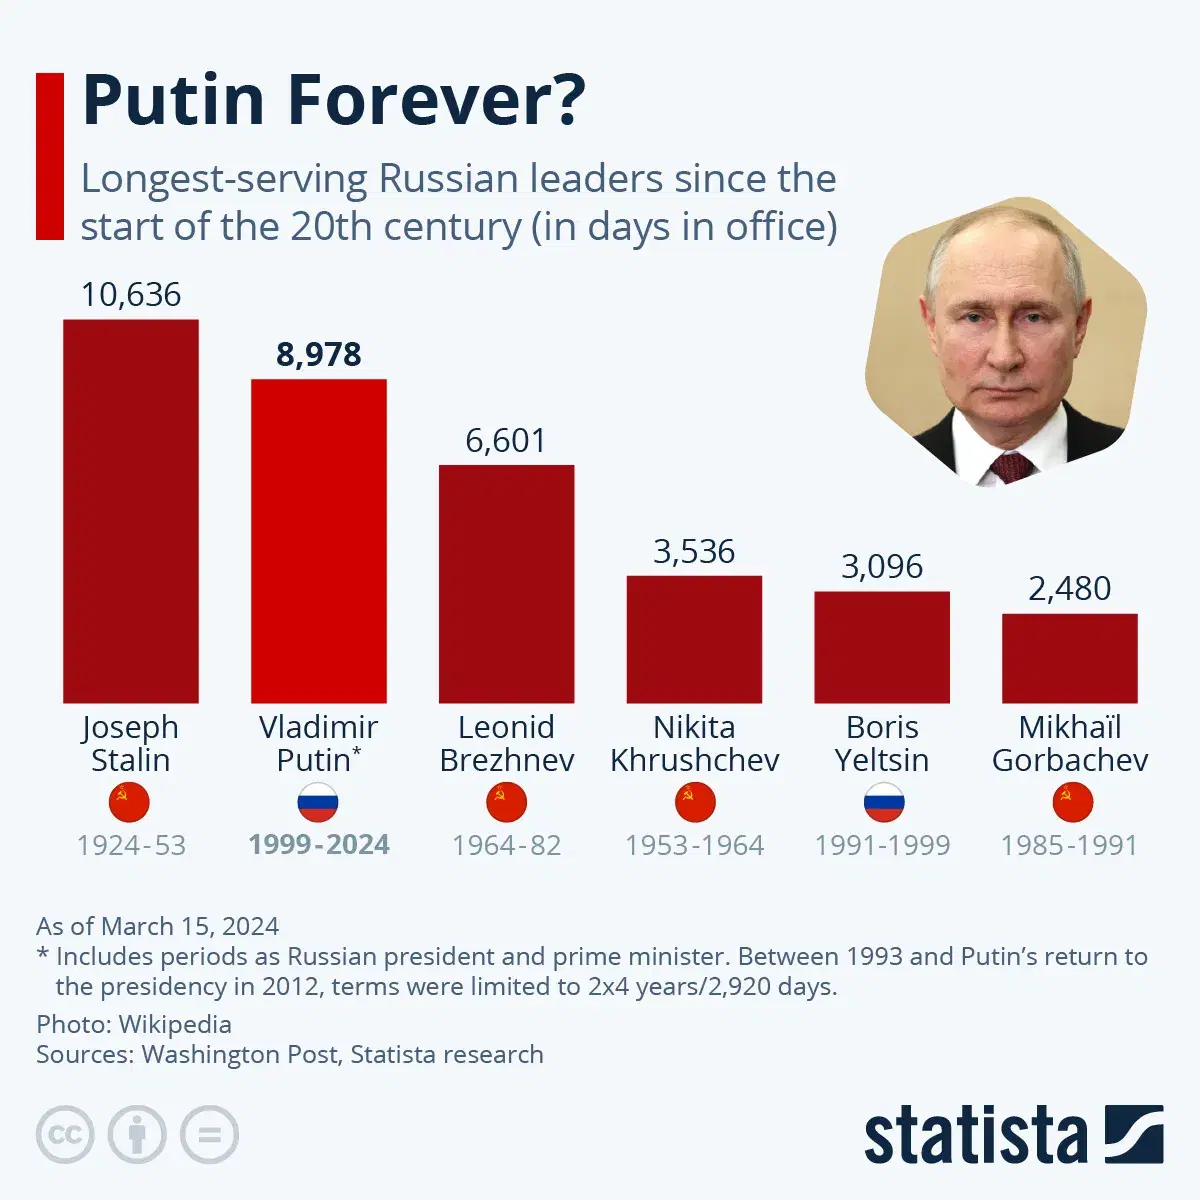 Longest-Serving Russian Leaders Since the Start of the 20th Century